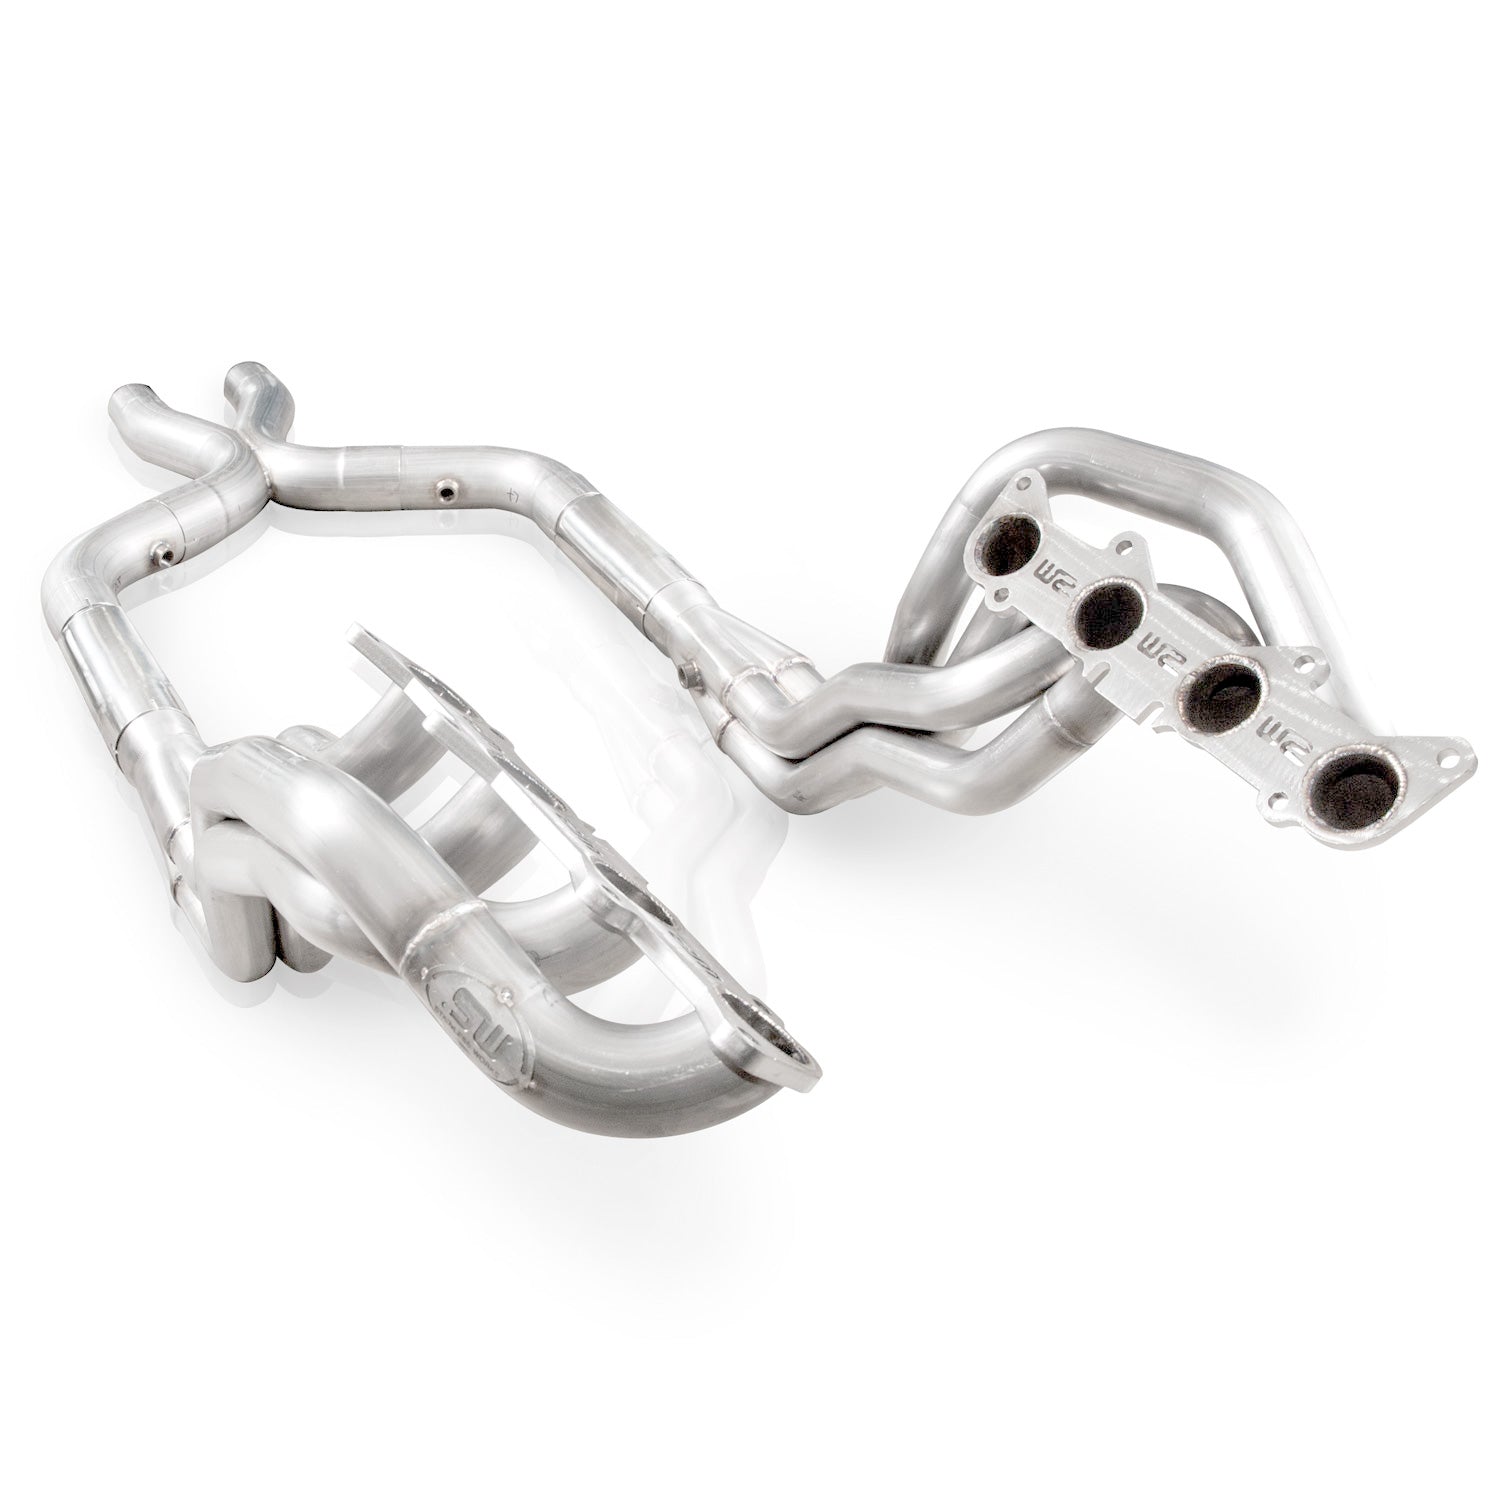 Stainless Power Headers 1-7/8" With Catted Leads Factory Connect - SSTubes